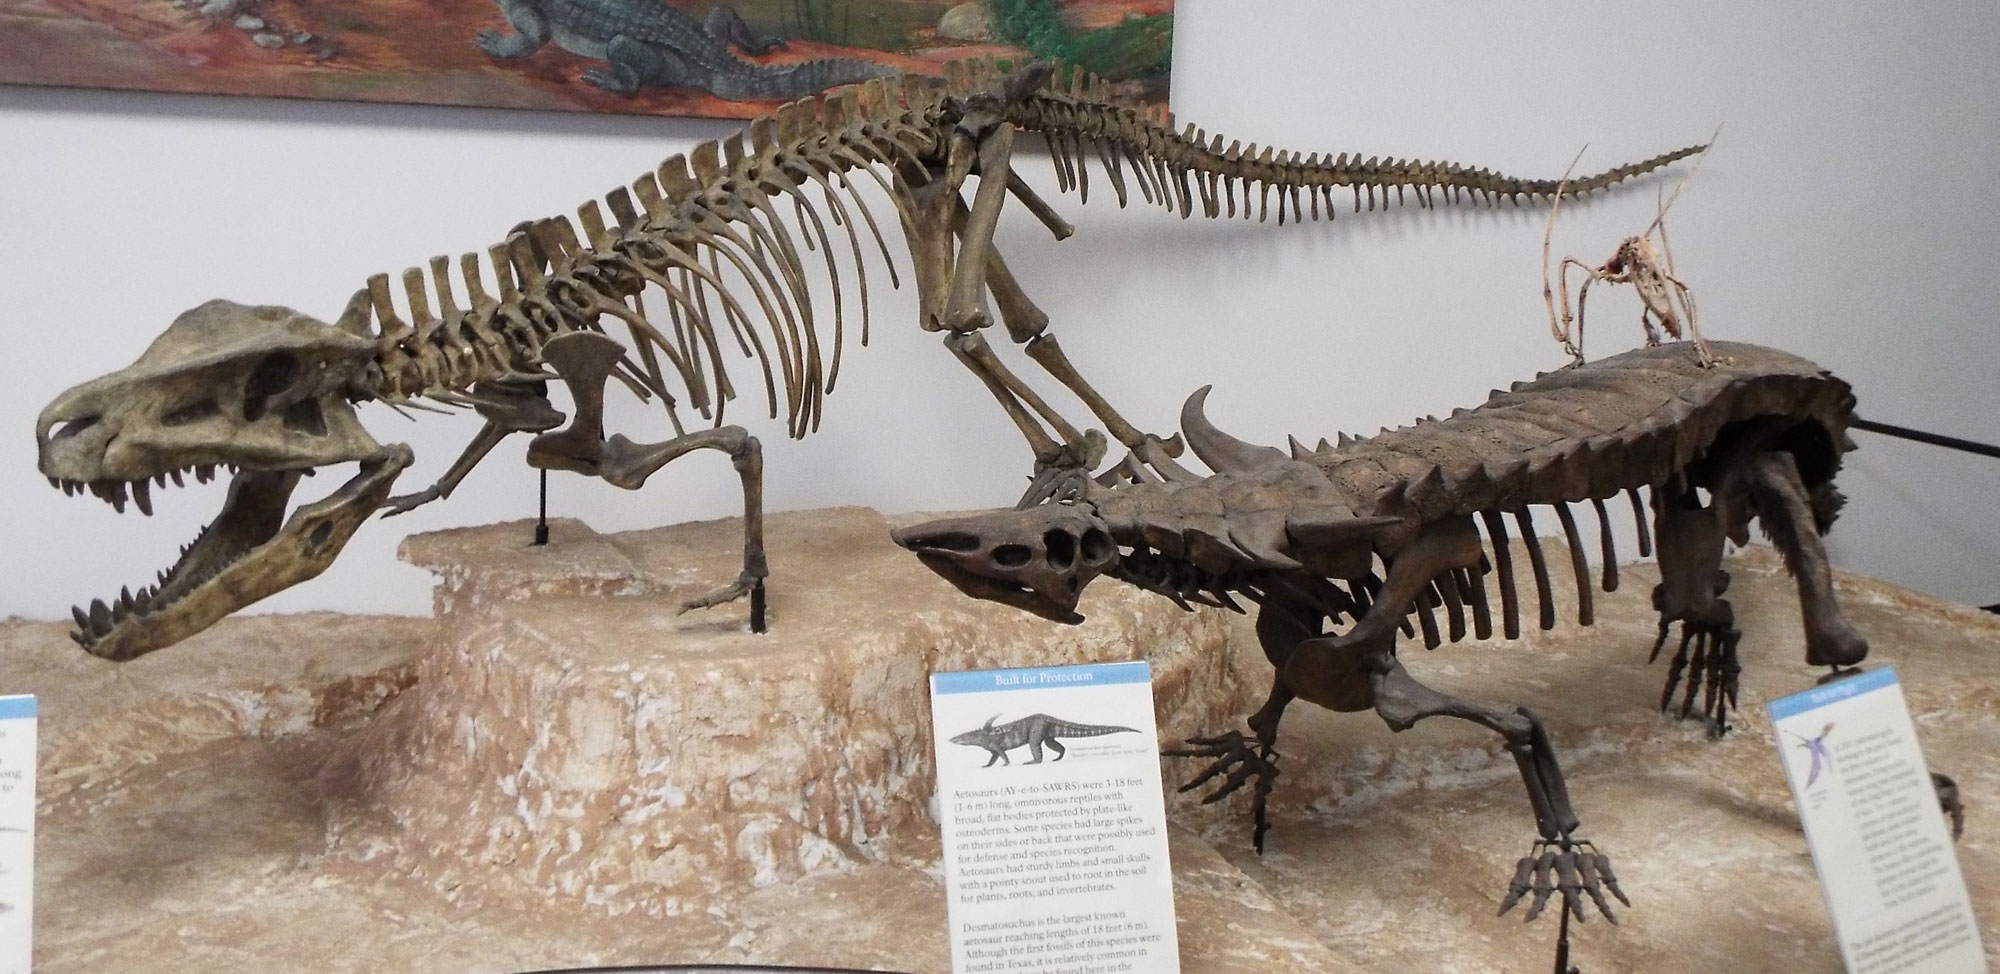 Photograph of a display of casts of vertebrate skeletons on display at Petrified Forest National Park. In the display are the bipedal Postosuchus, a carnivore; the four-legged, armored Desmatosuchus; and a small pterosaur (flying reptile) on the back of the Desmatosuchus.